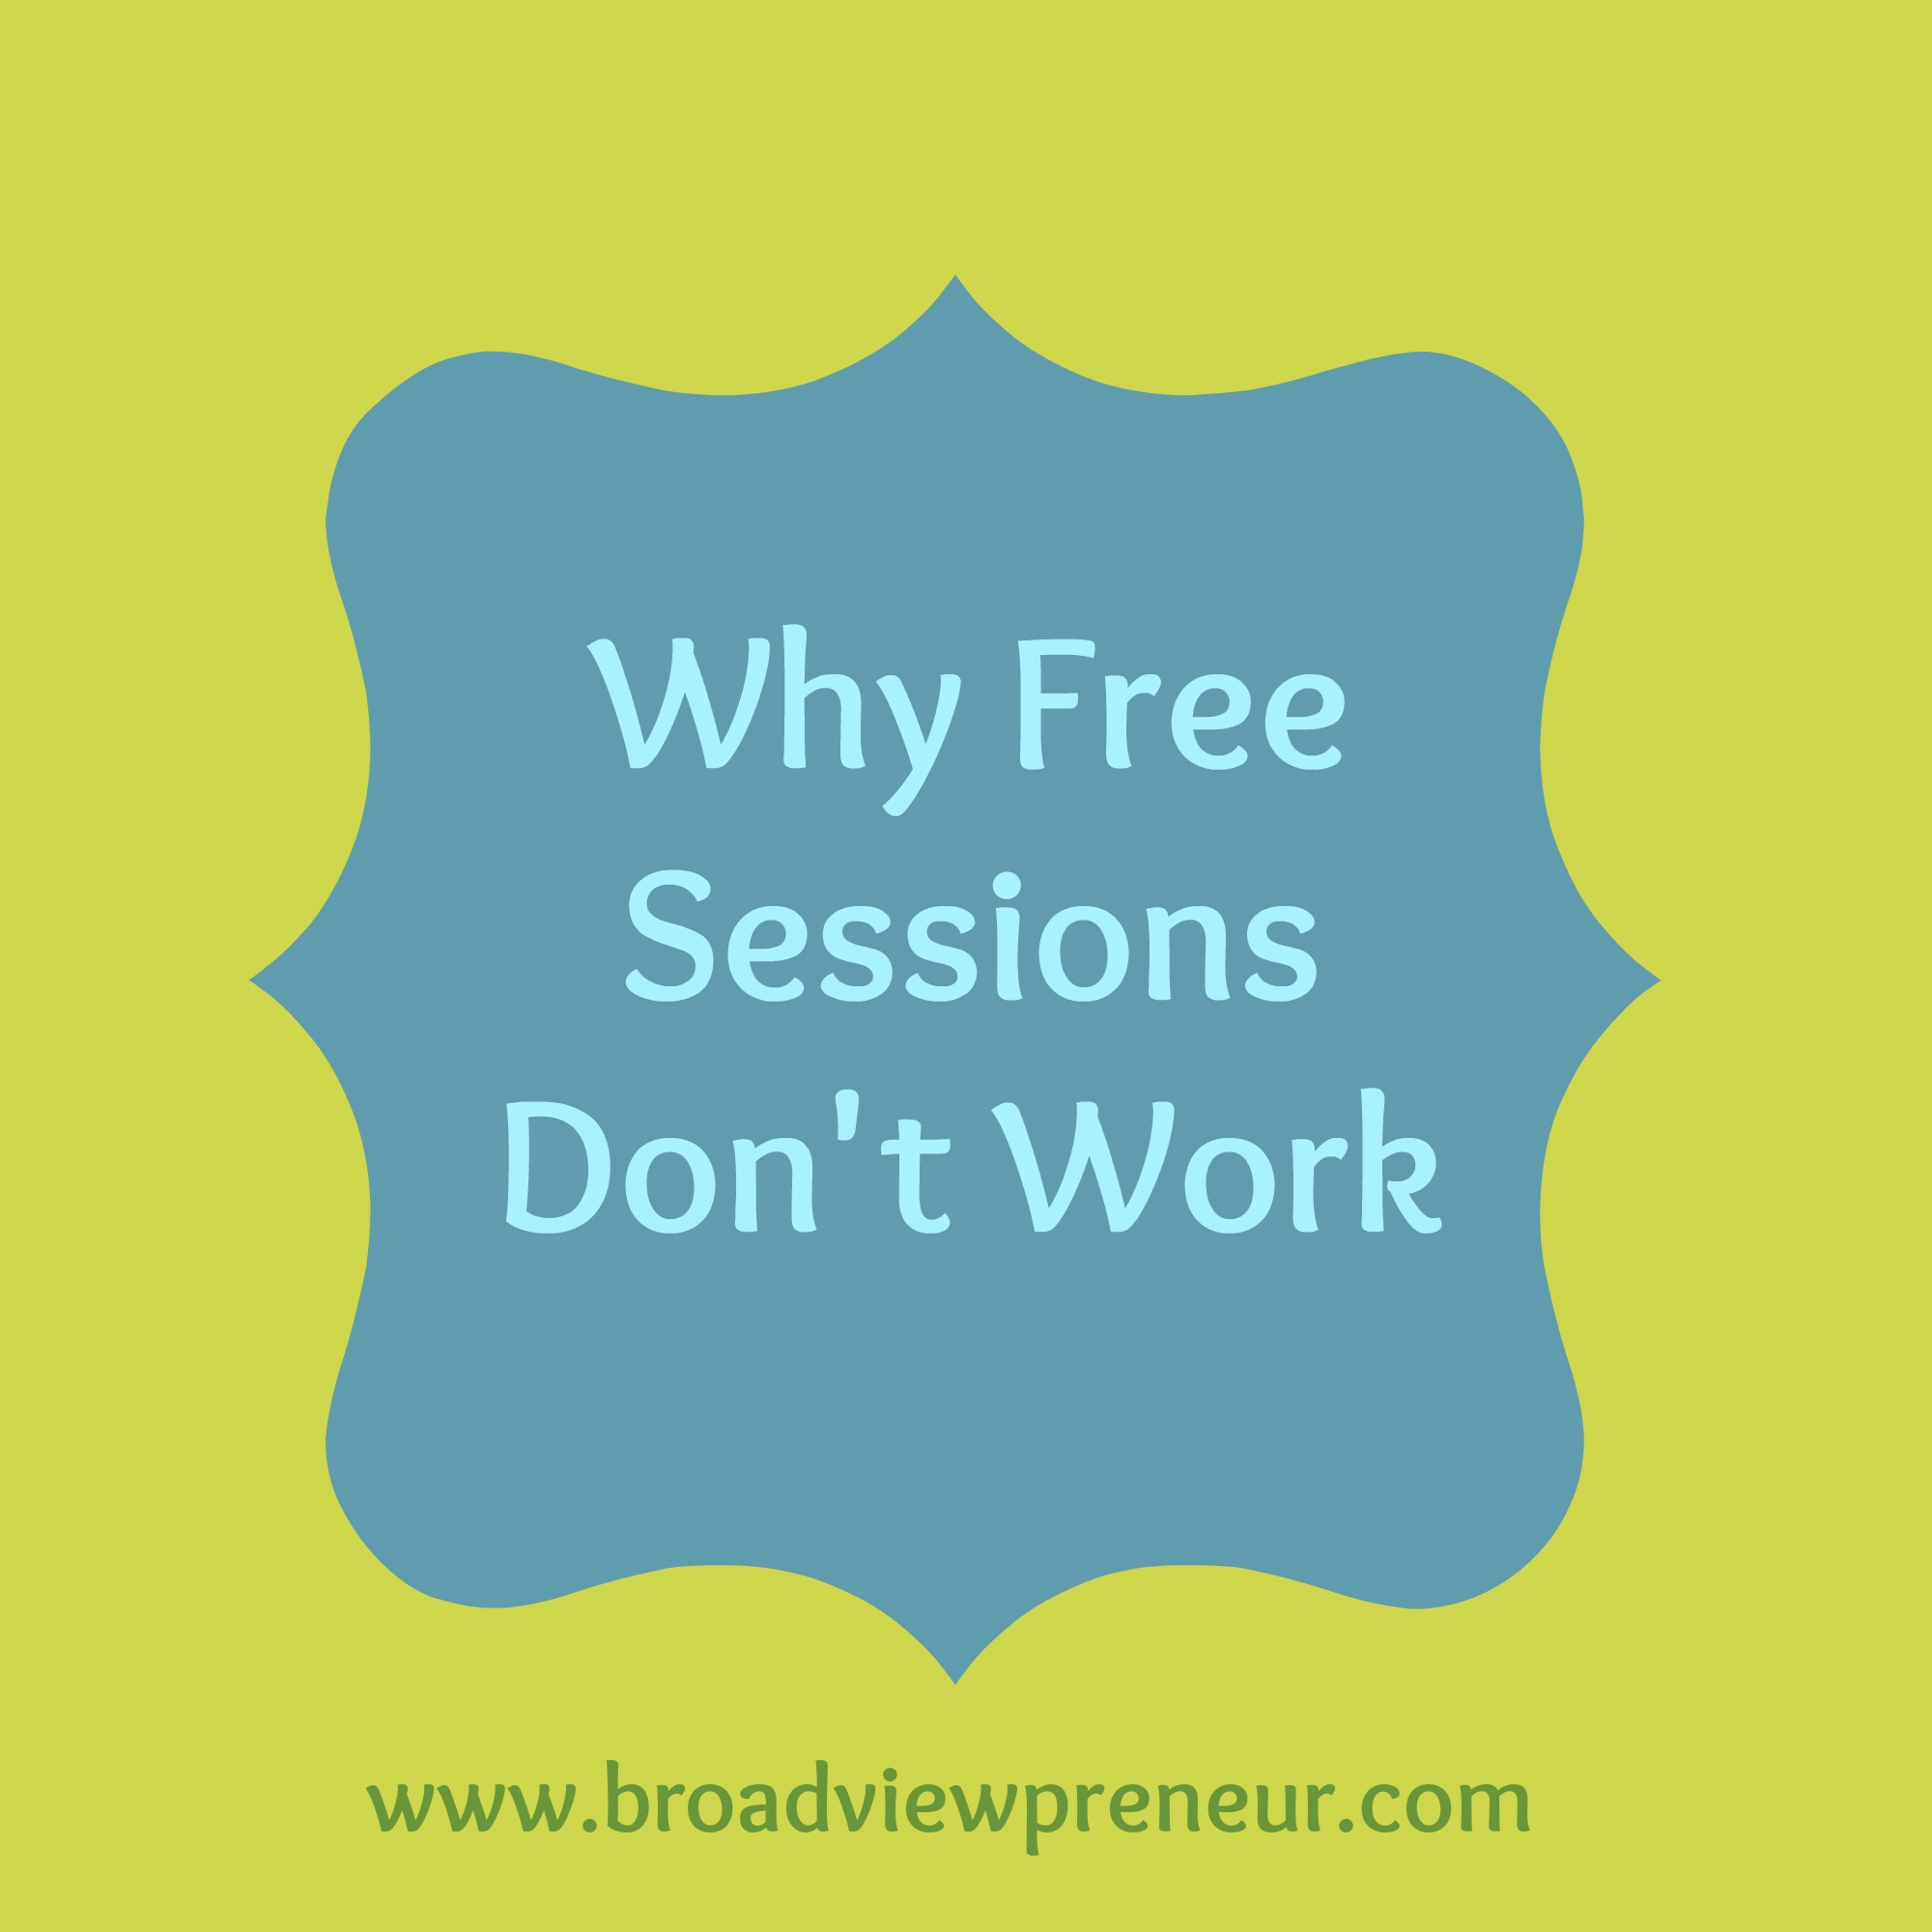 why free sessions don't work